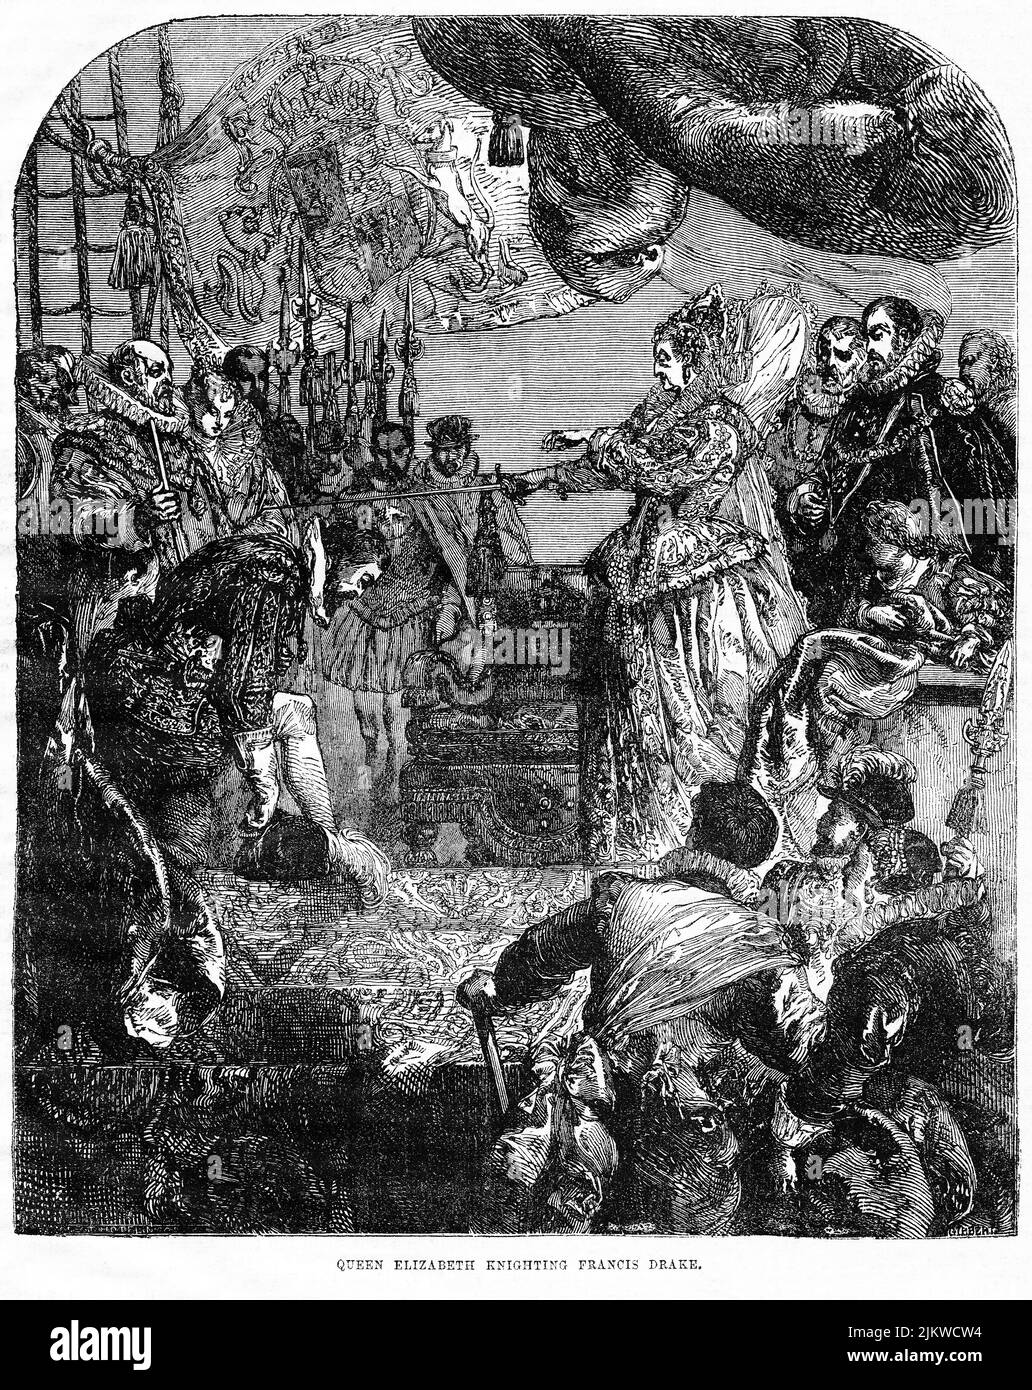 Queen Elizabeth Knighting Francis Drake, Illustration from the Book, 'John Cassel’s Illustrated History of England, Volume II', text by William Howitt, Cassell, Petter, and Galpin, London, 1858 Stock Photo